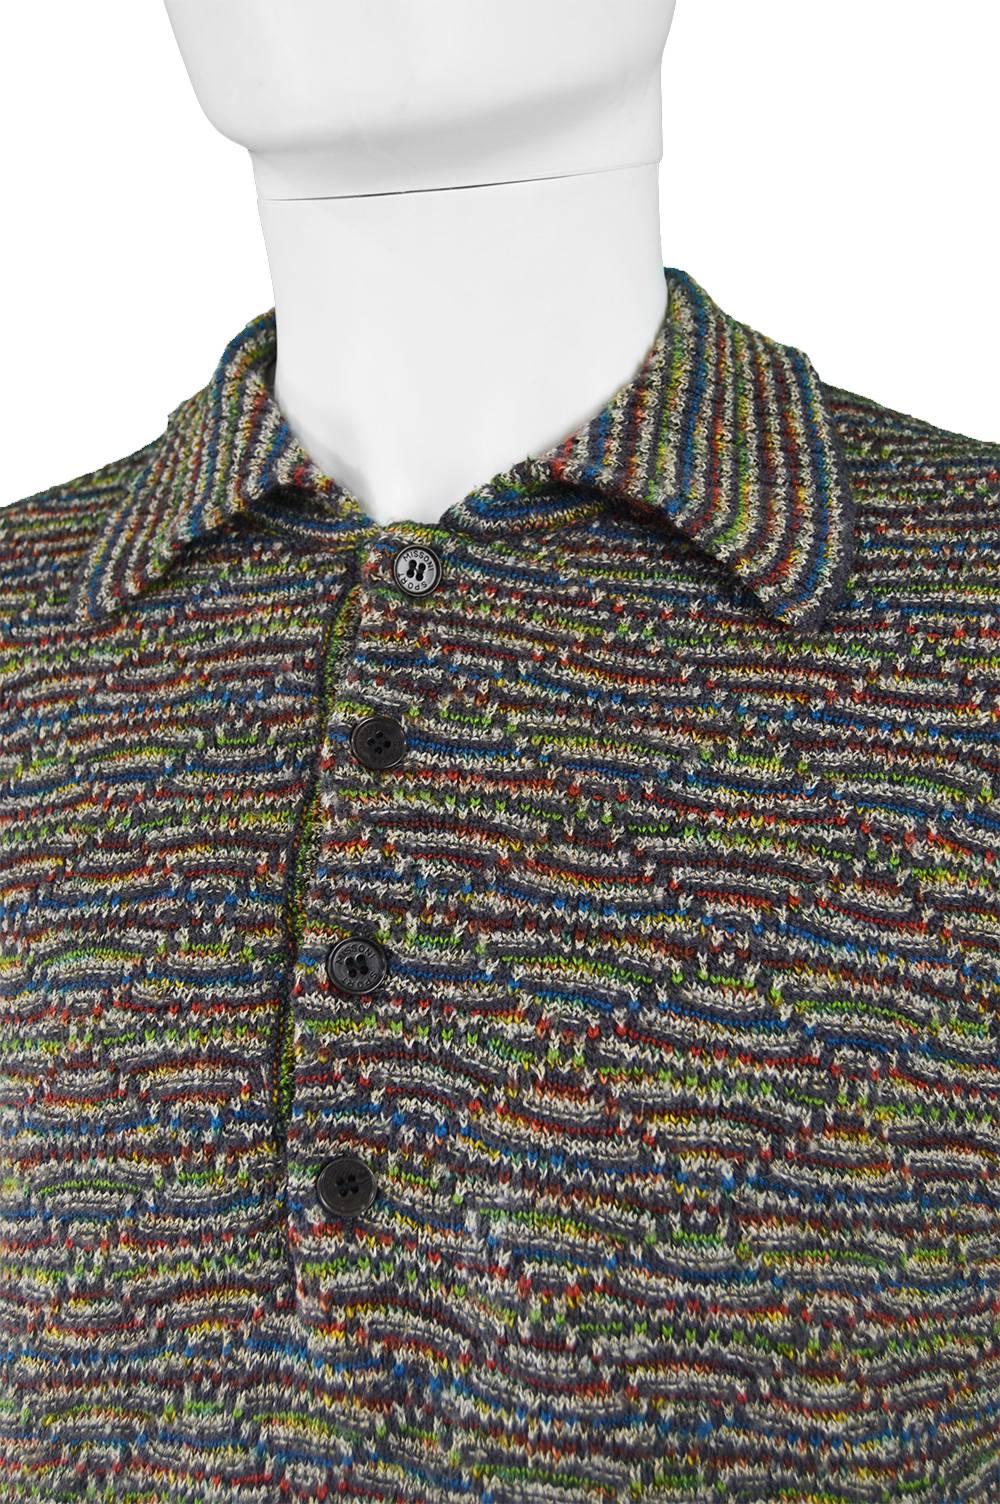 Gray Missoni Men's Vintage Textured Wool, Acrylic & Alpaca Knit Sweater, 1990s For Sale